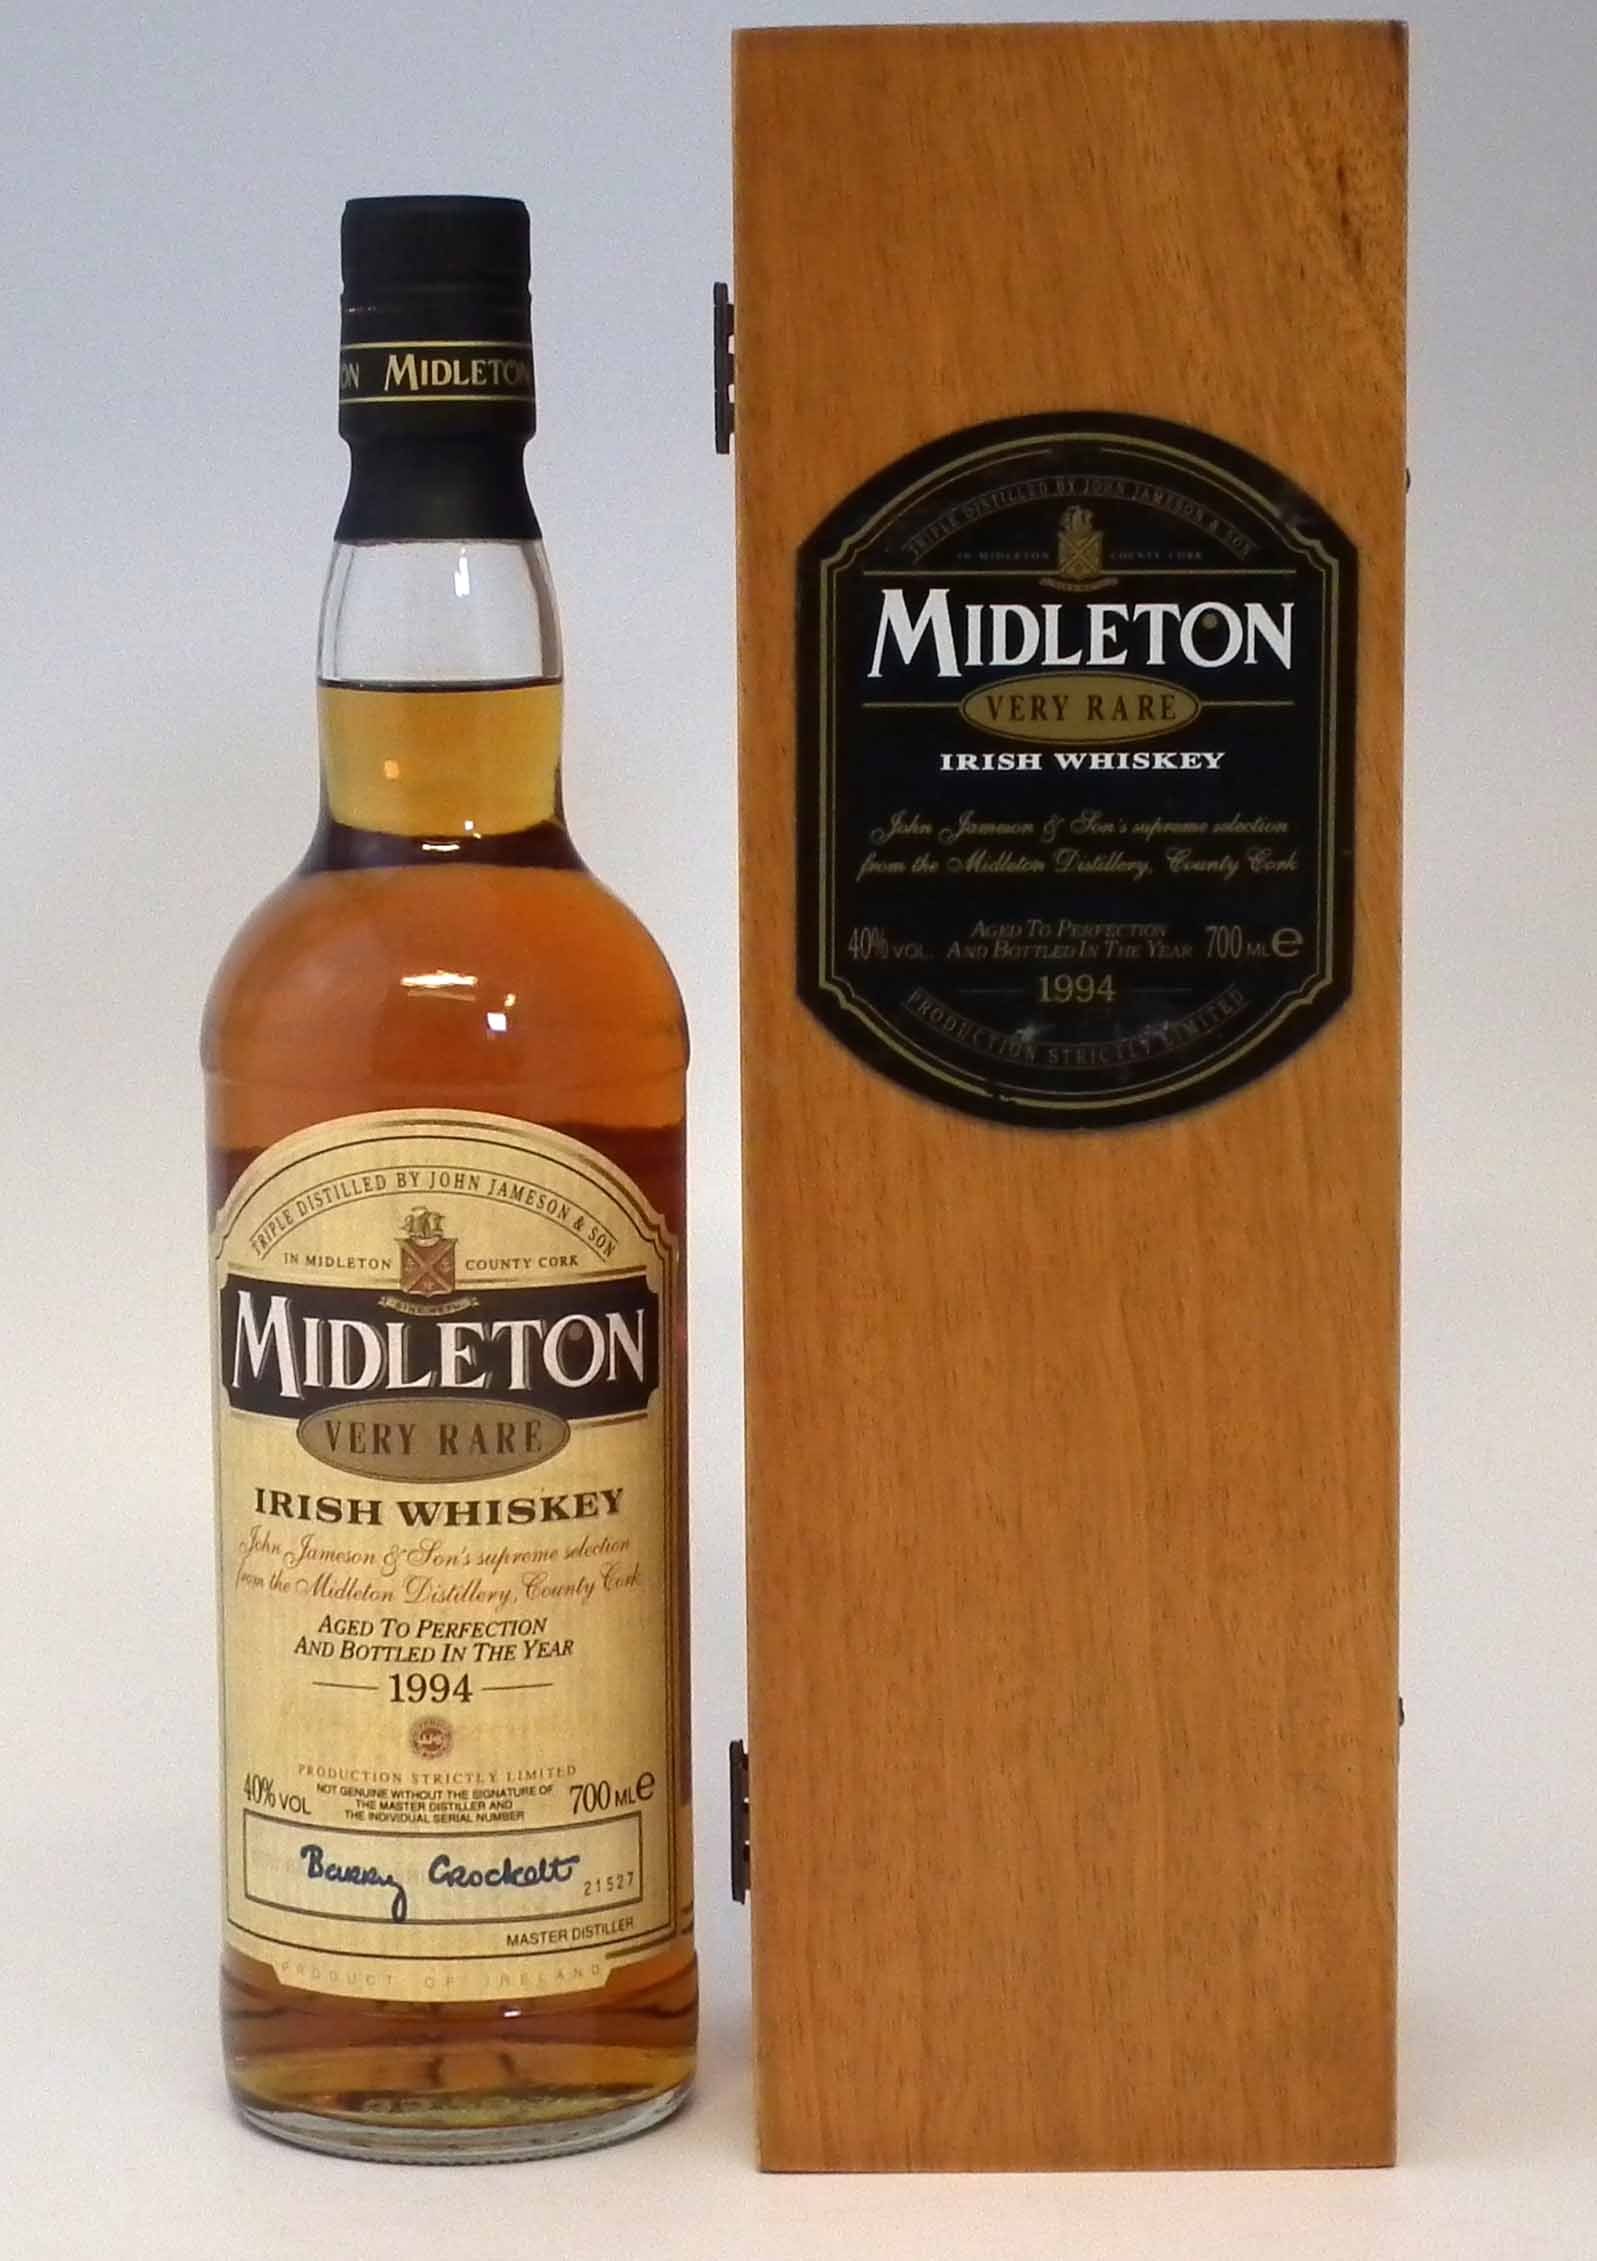 Midleton Very Rare Irish Whiskey - 1994 - 700ml number 21527 with wood box, certificate and